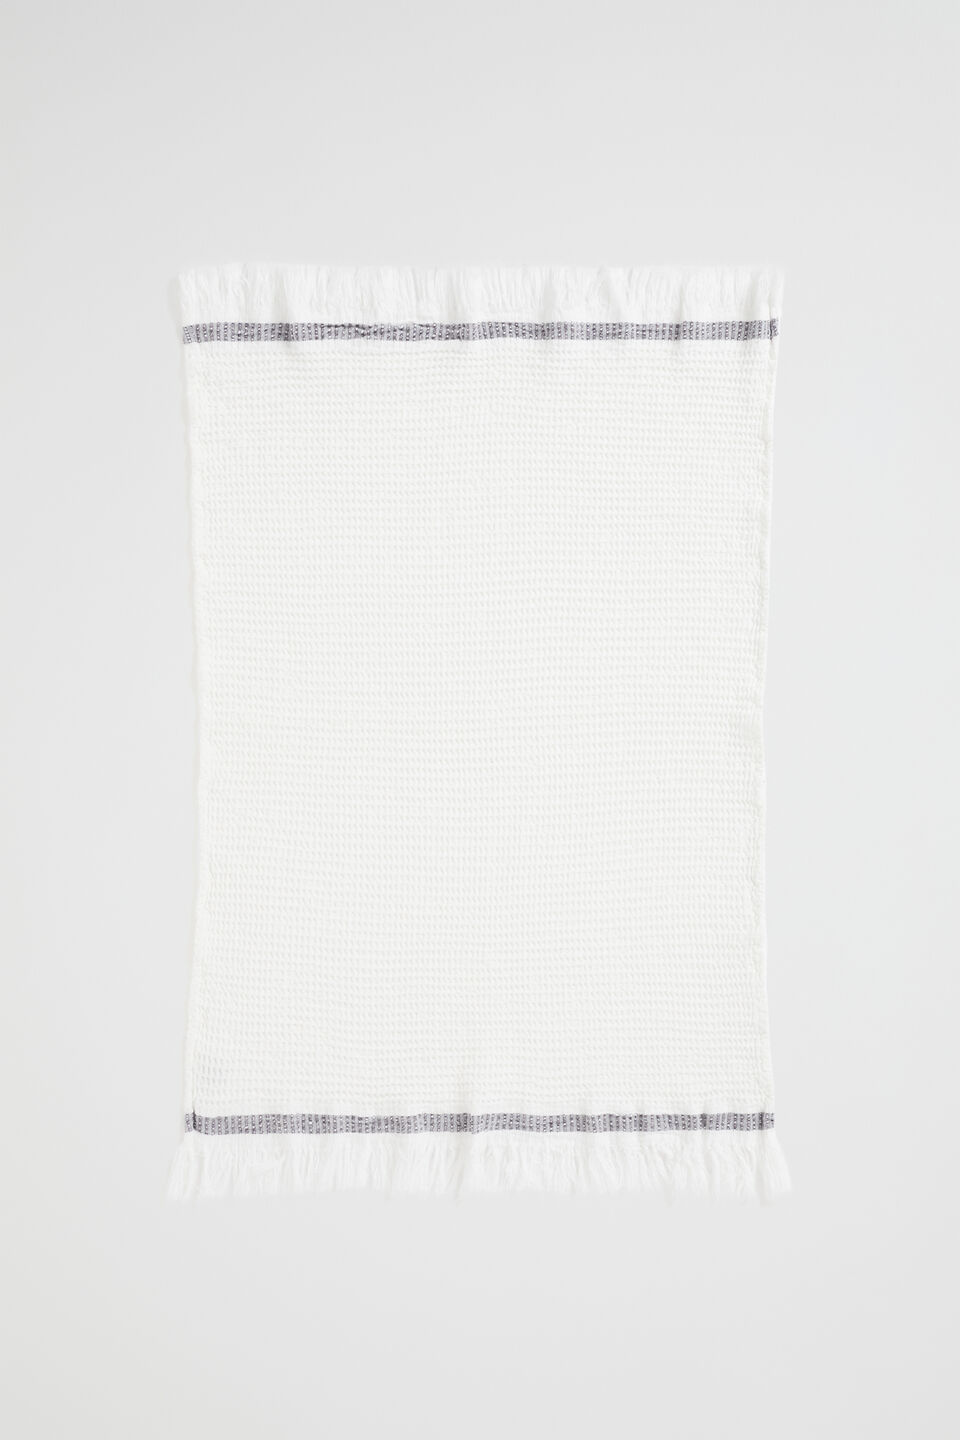 Thea Waffle Hand Towel  Antique White